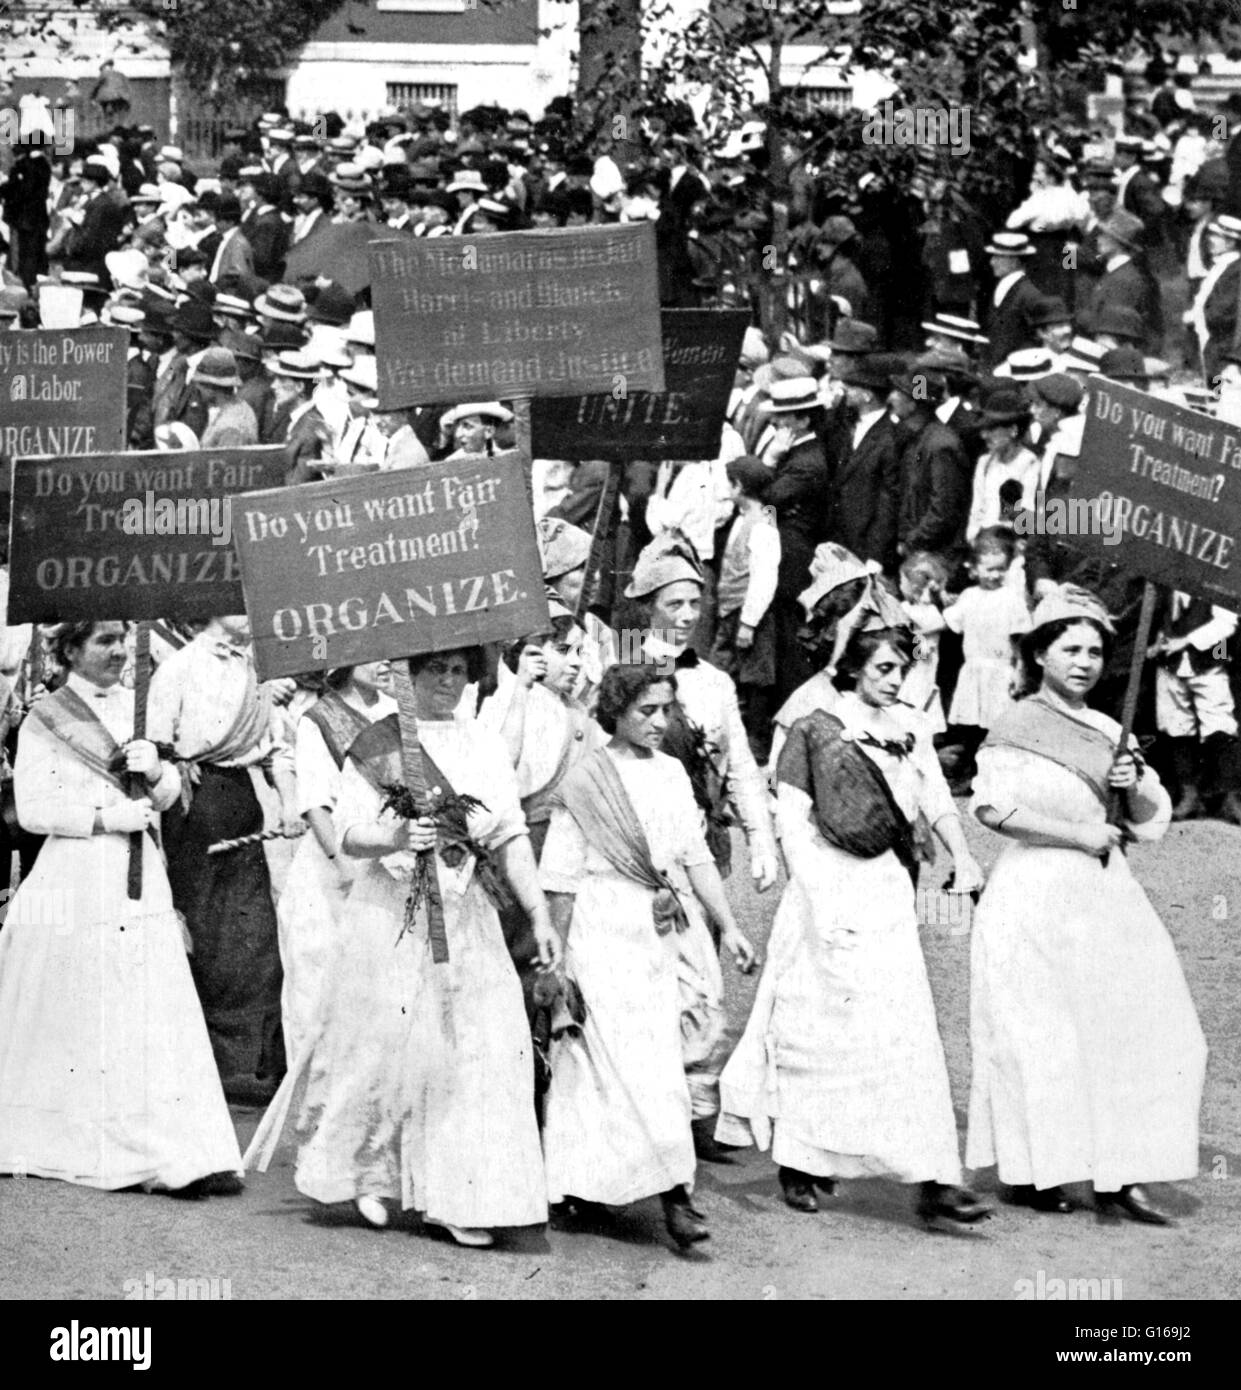 Women's suffrage is the right of women to vote and to run for office. By the end of the 19th century, Idaho, Colorado, Utah, and Wyoming had enfranchised women after effort by the suffrage associations at the state level. During the beginning of the 20th Stock Photo